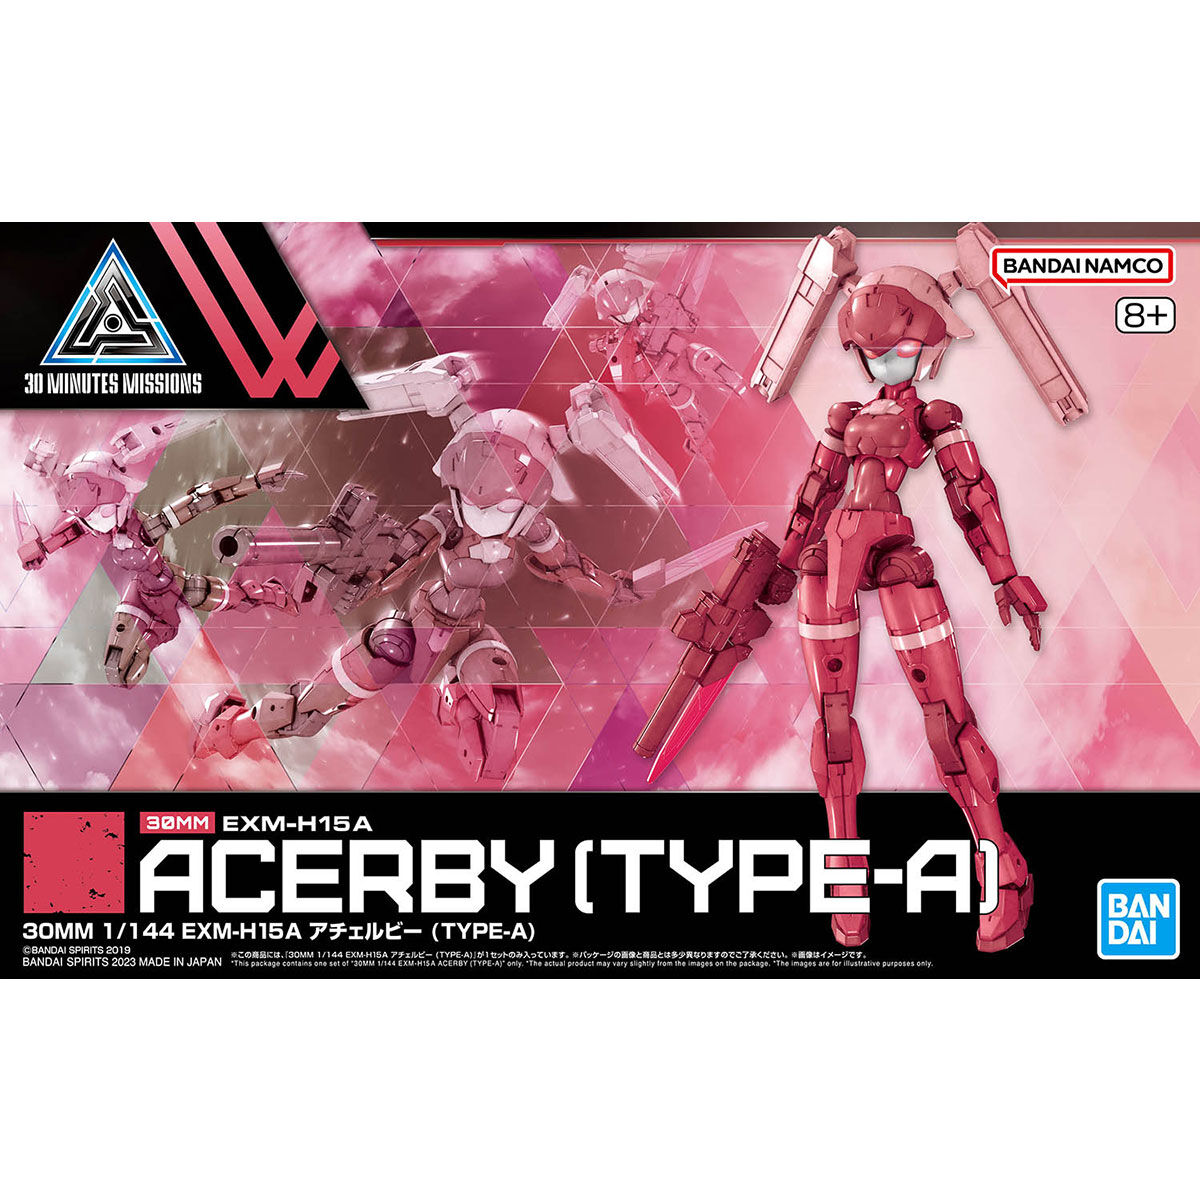 acerby type a box